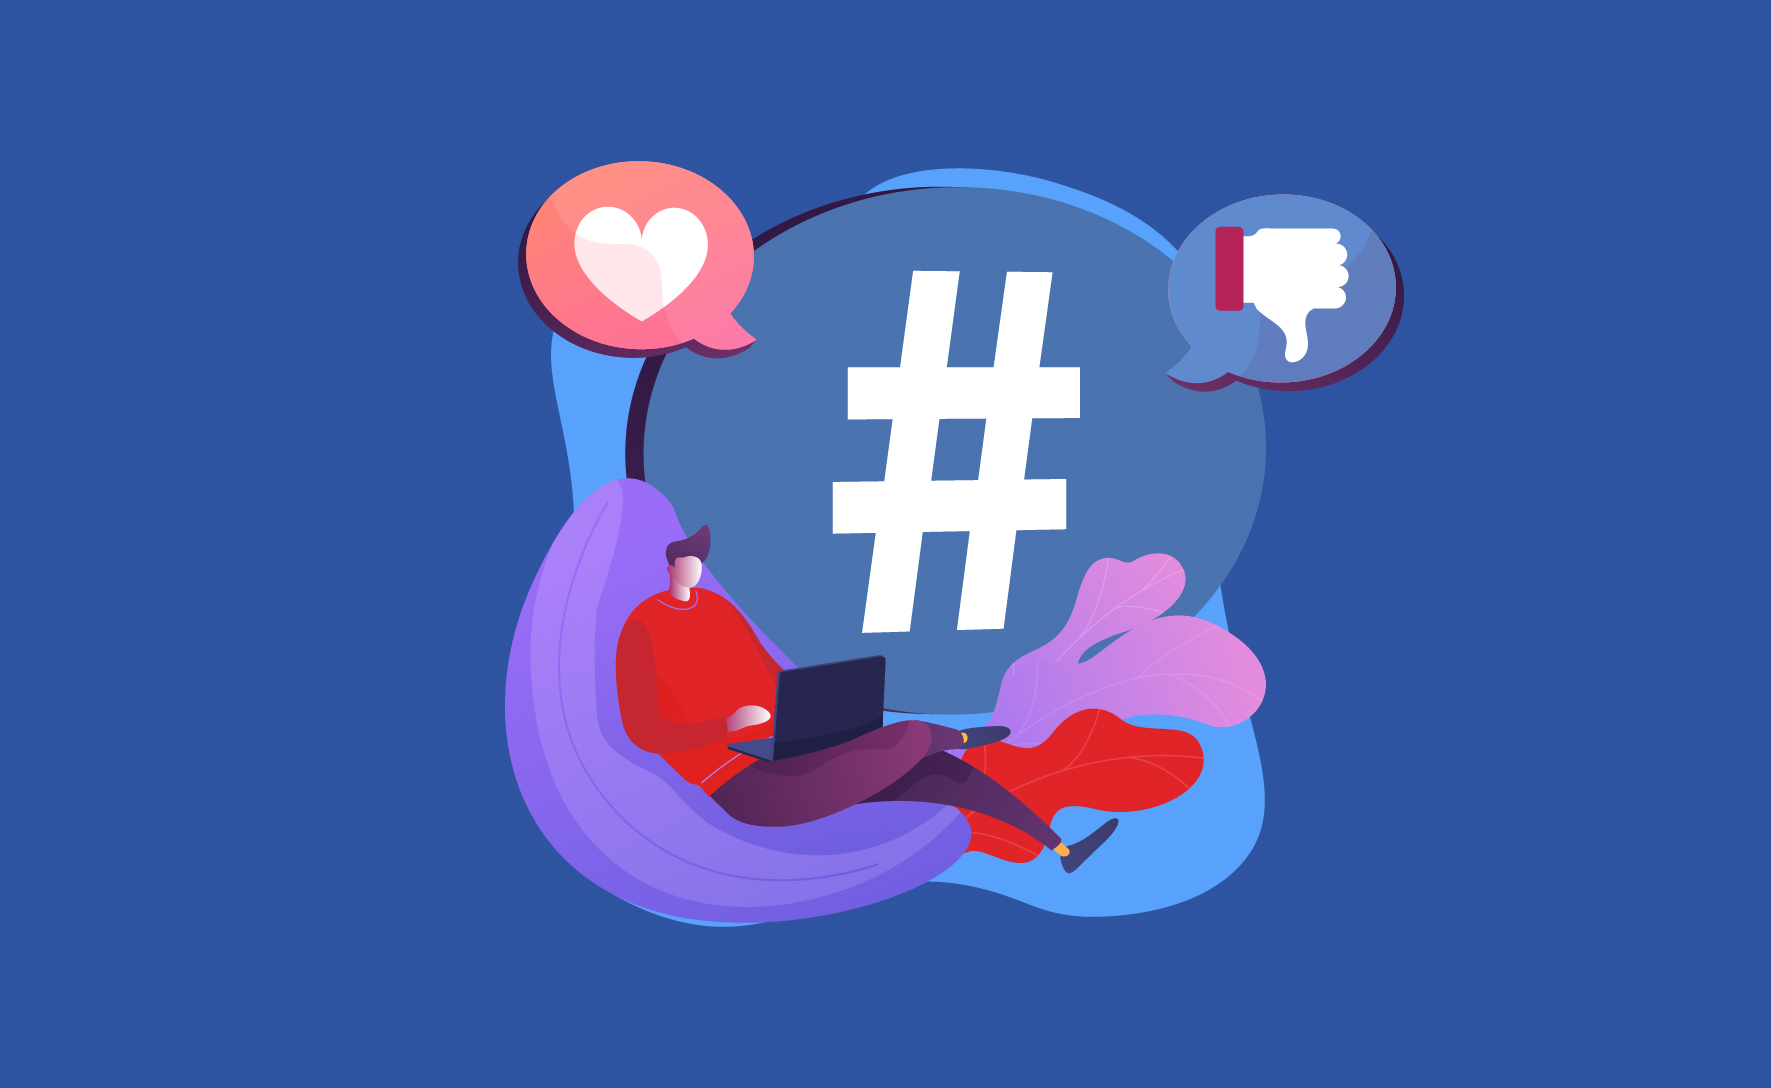 What are the advantages and disadvantages of trending hashtags